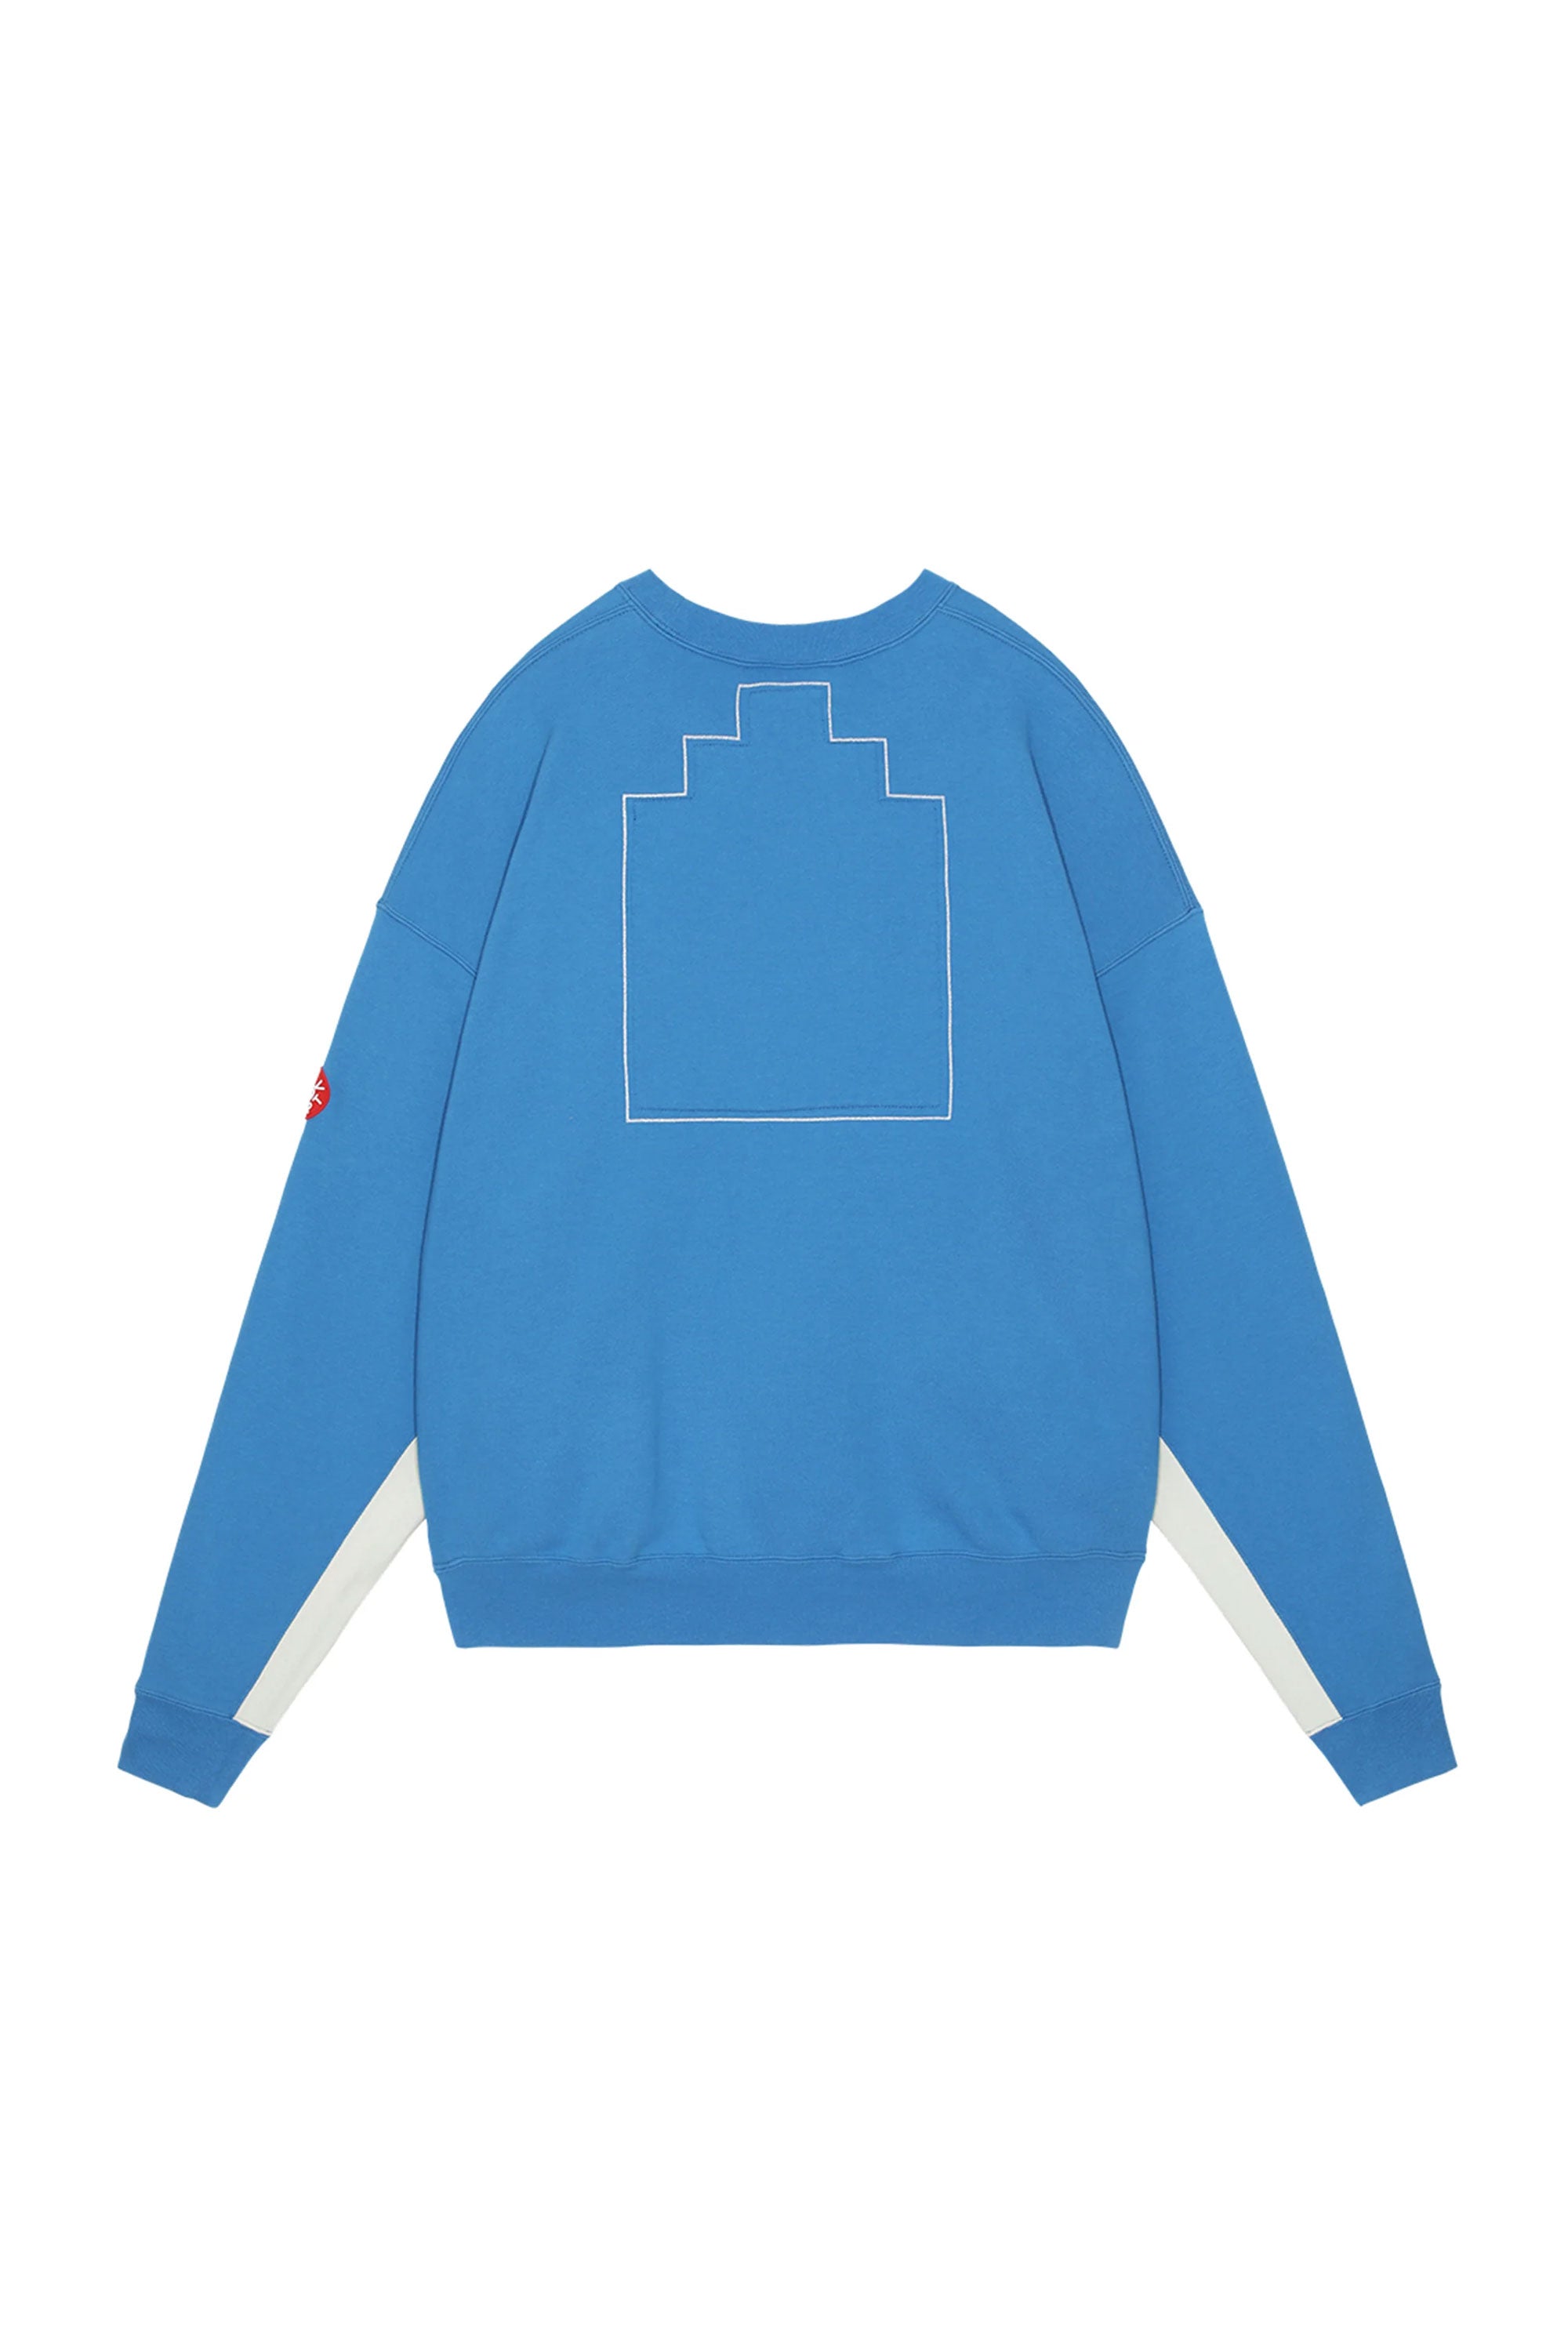 The CAV EMPT - DISSATISFACTION CREW NECK  available online with global shipping, and in PAM Stores Melbourne and Sydney.